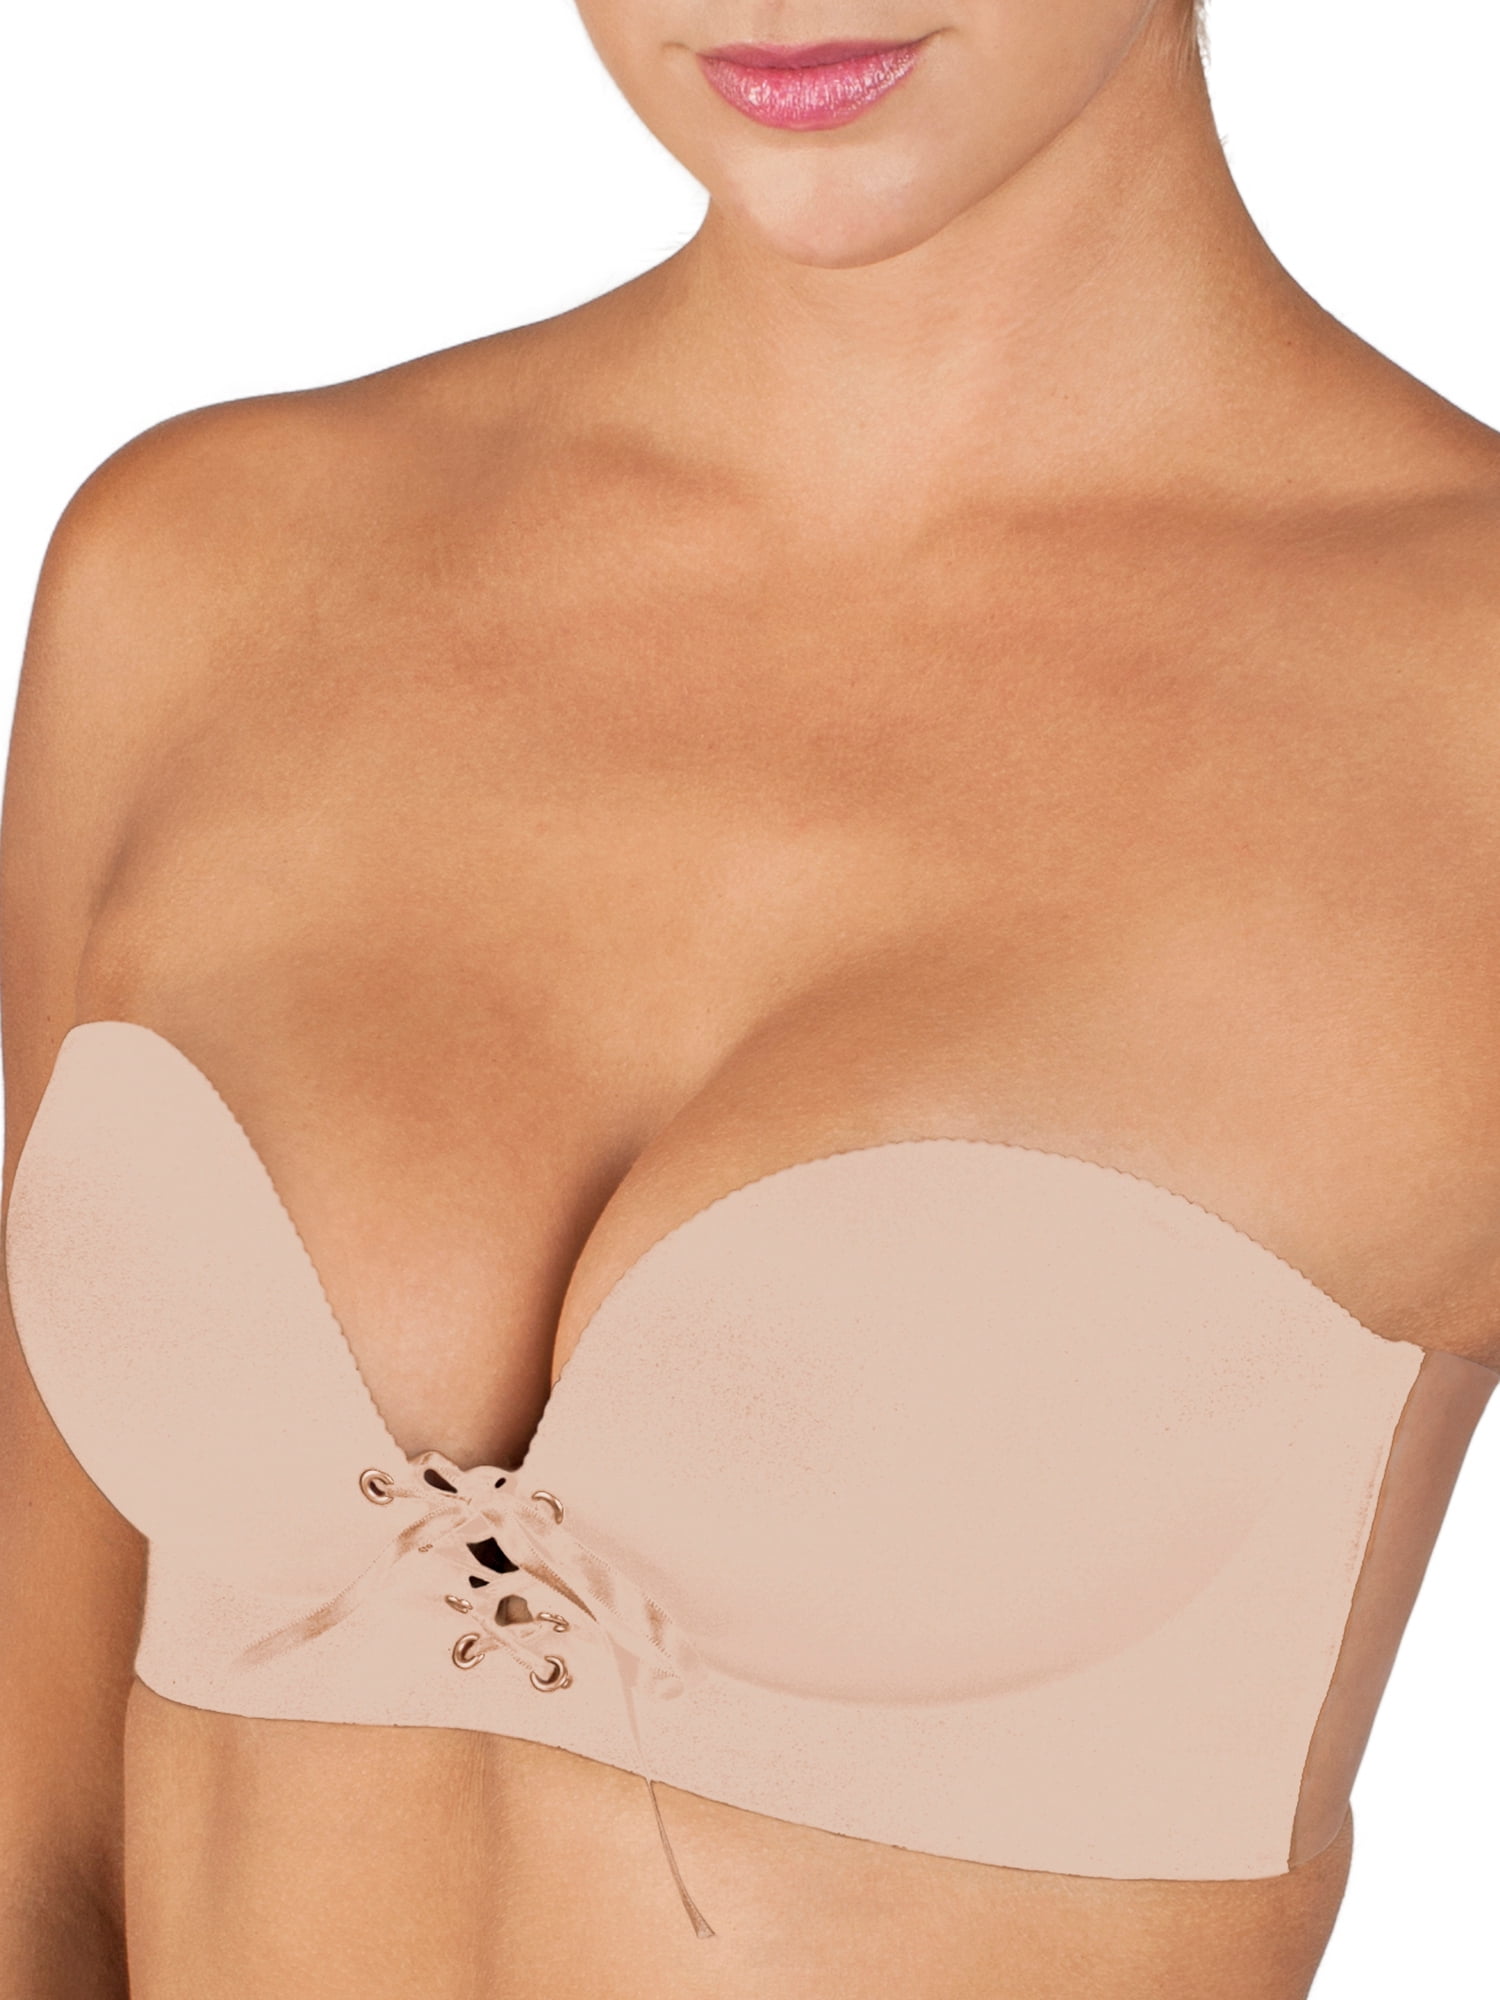 Buy Fashion Forms Women's Backless Strapless U Plunge Bra, Nude, D